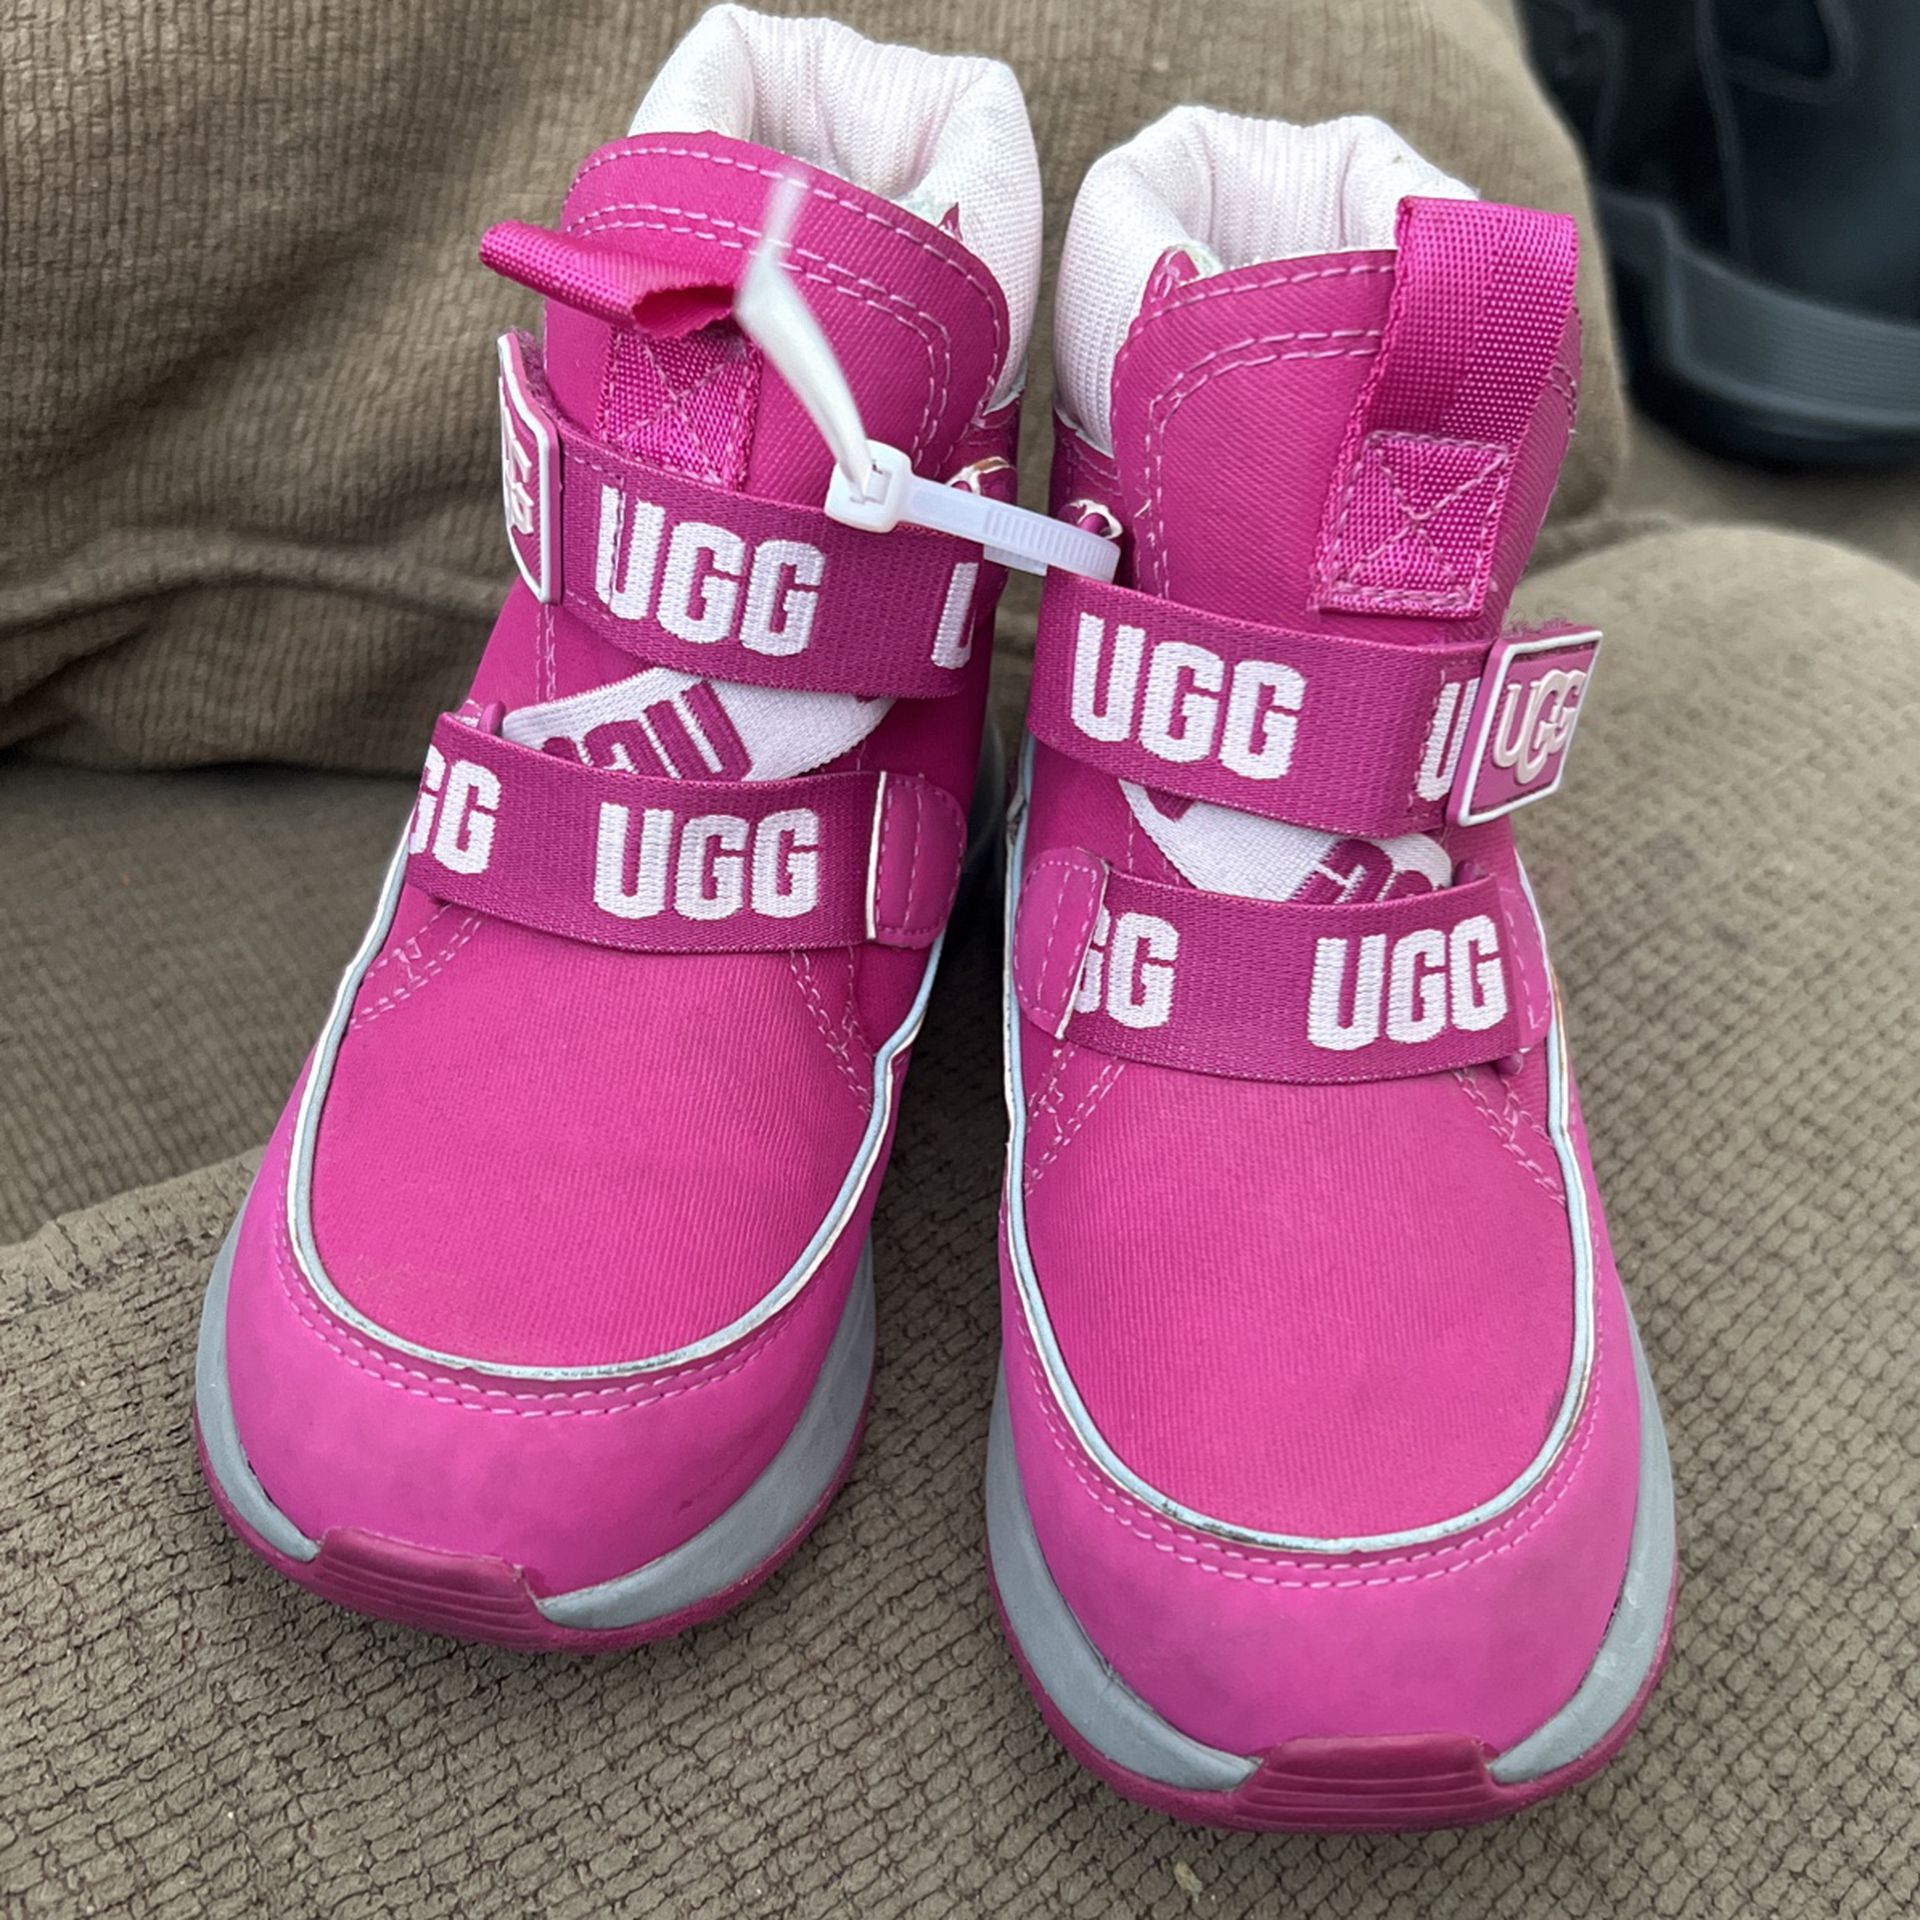 in great Condition. ugg Boots For Kids